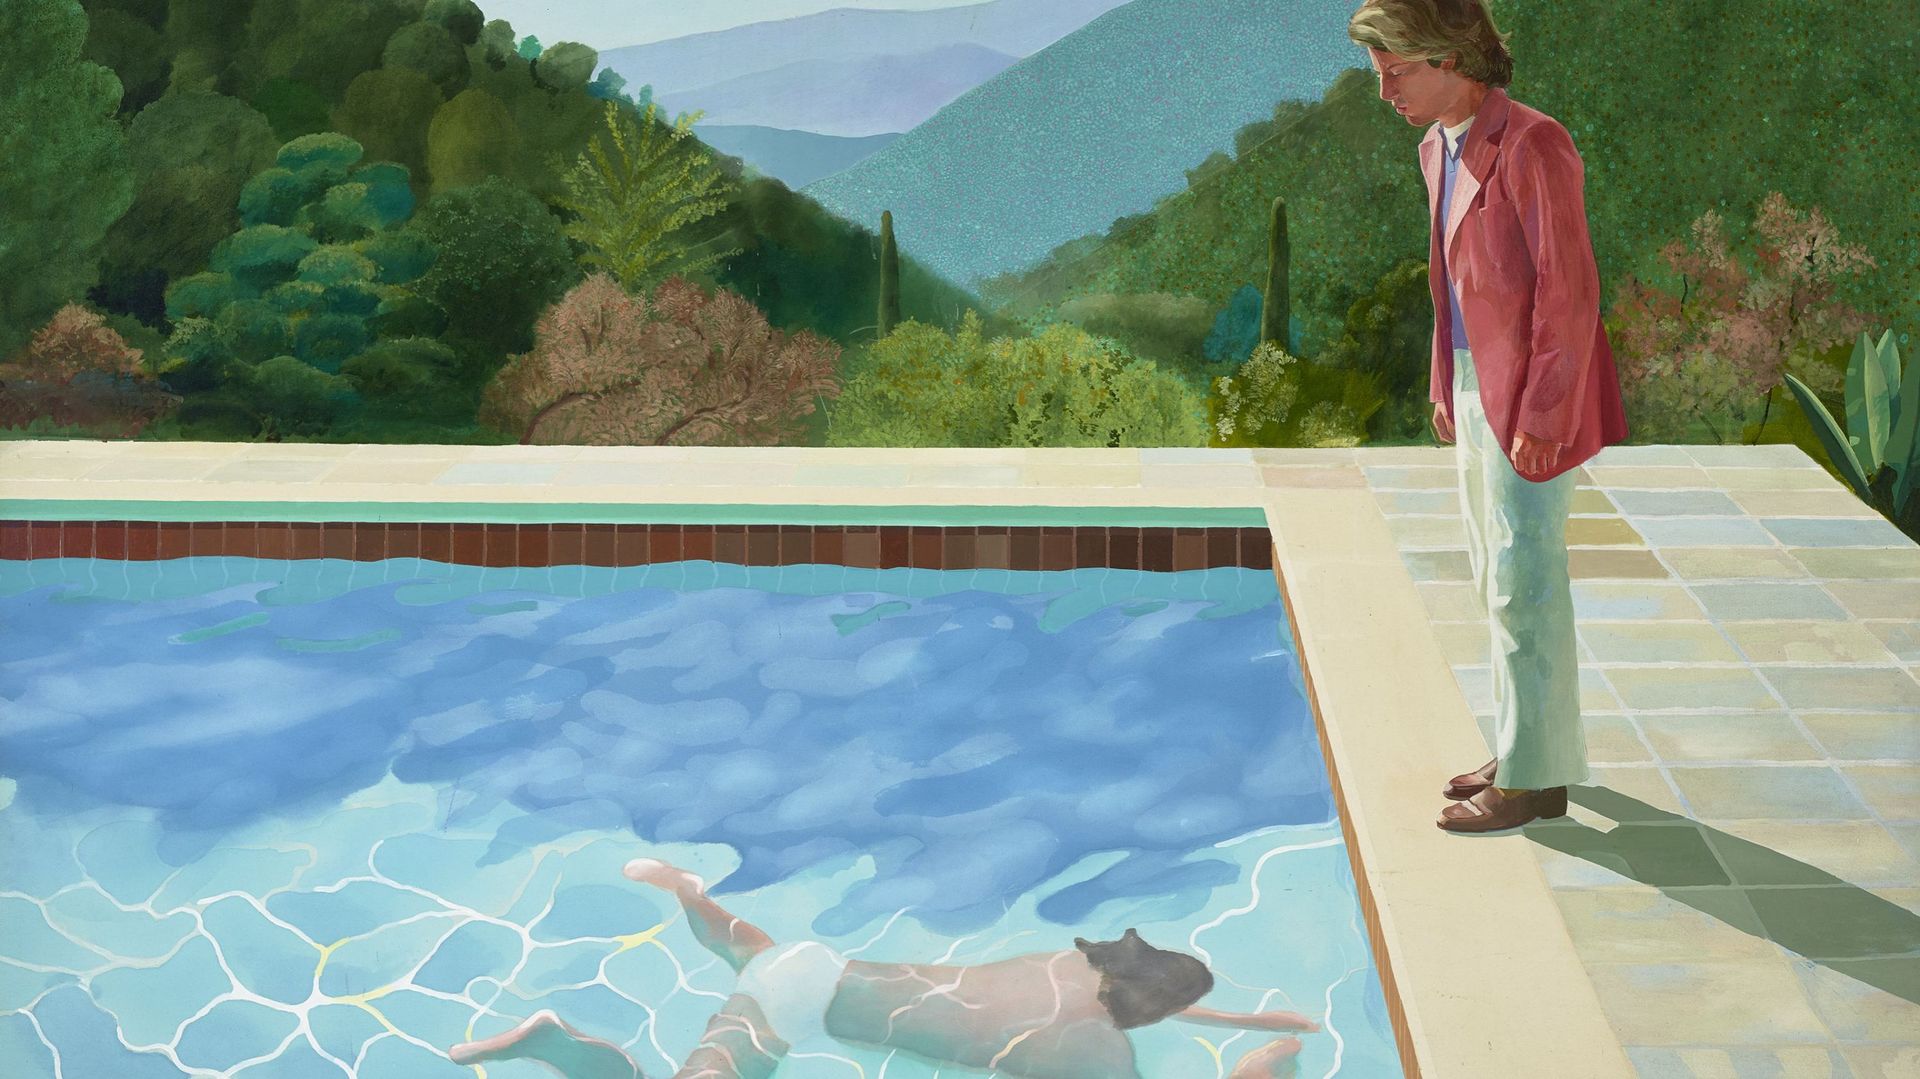 David Hockney, 'Portrait of an Artist (Pool with Two Figures)', 1971.